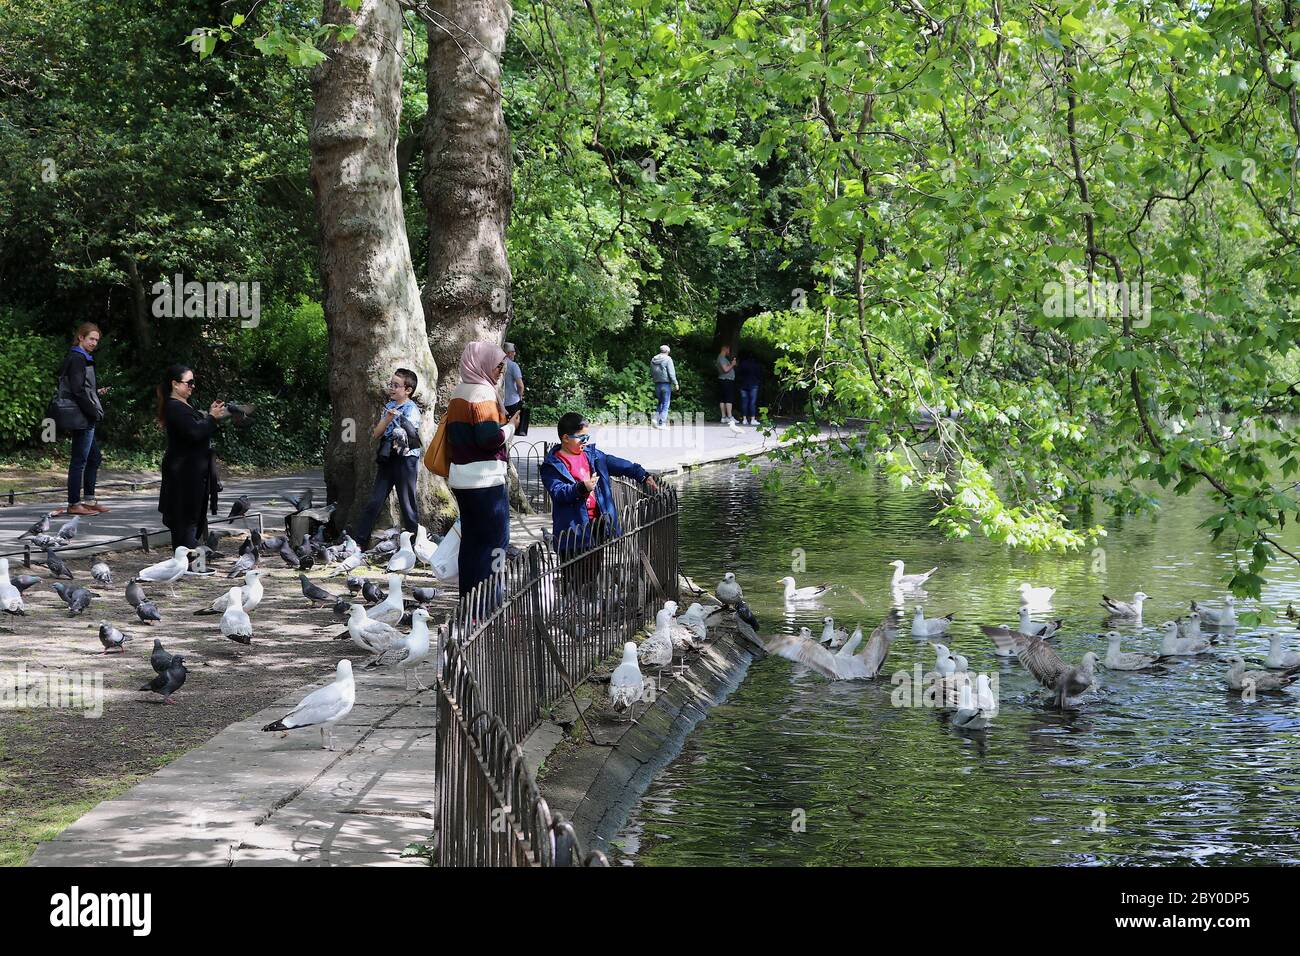 Dublin. 9th June, 2020. People enjoy outdoor life at a public park in Dublin, Ireland, June 8, 2020. More businesses and public amenities in Ireland reopened on Monday as the country entered the first day of what the government called Phase 2 in reopening society and business. Credit: Xinhua/Alamy Live News Stock Photo